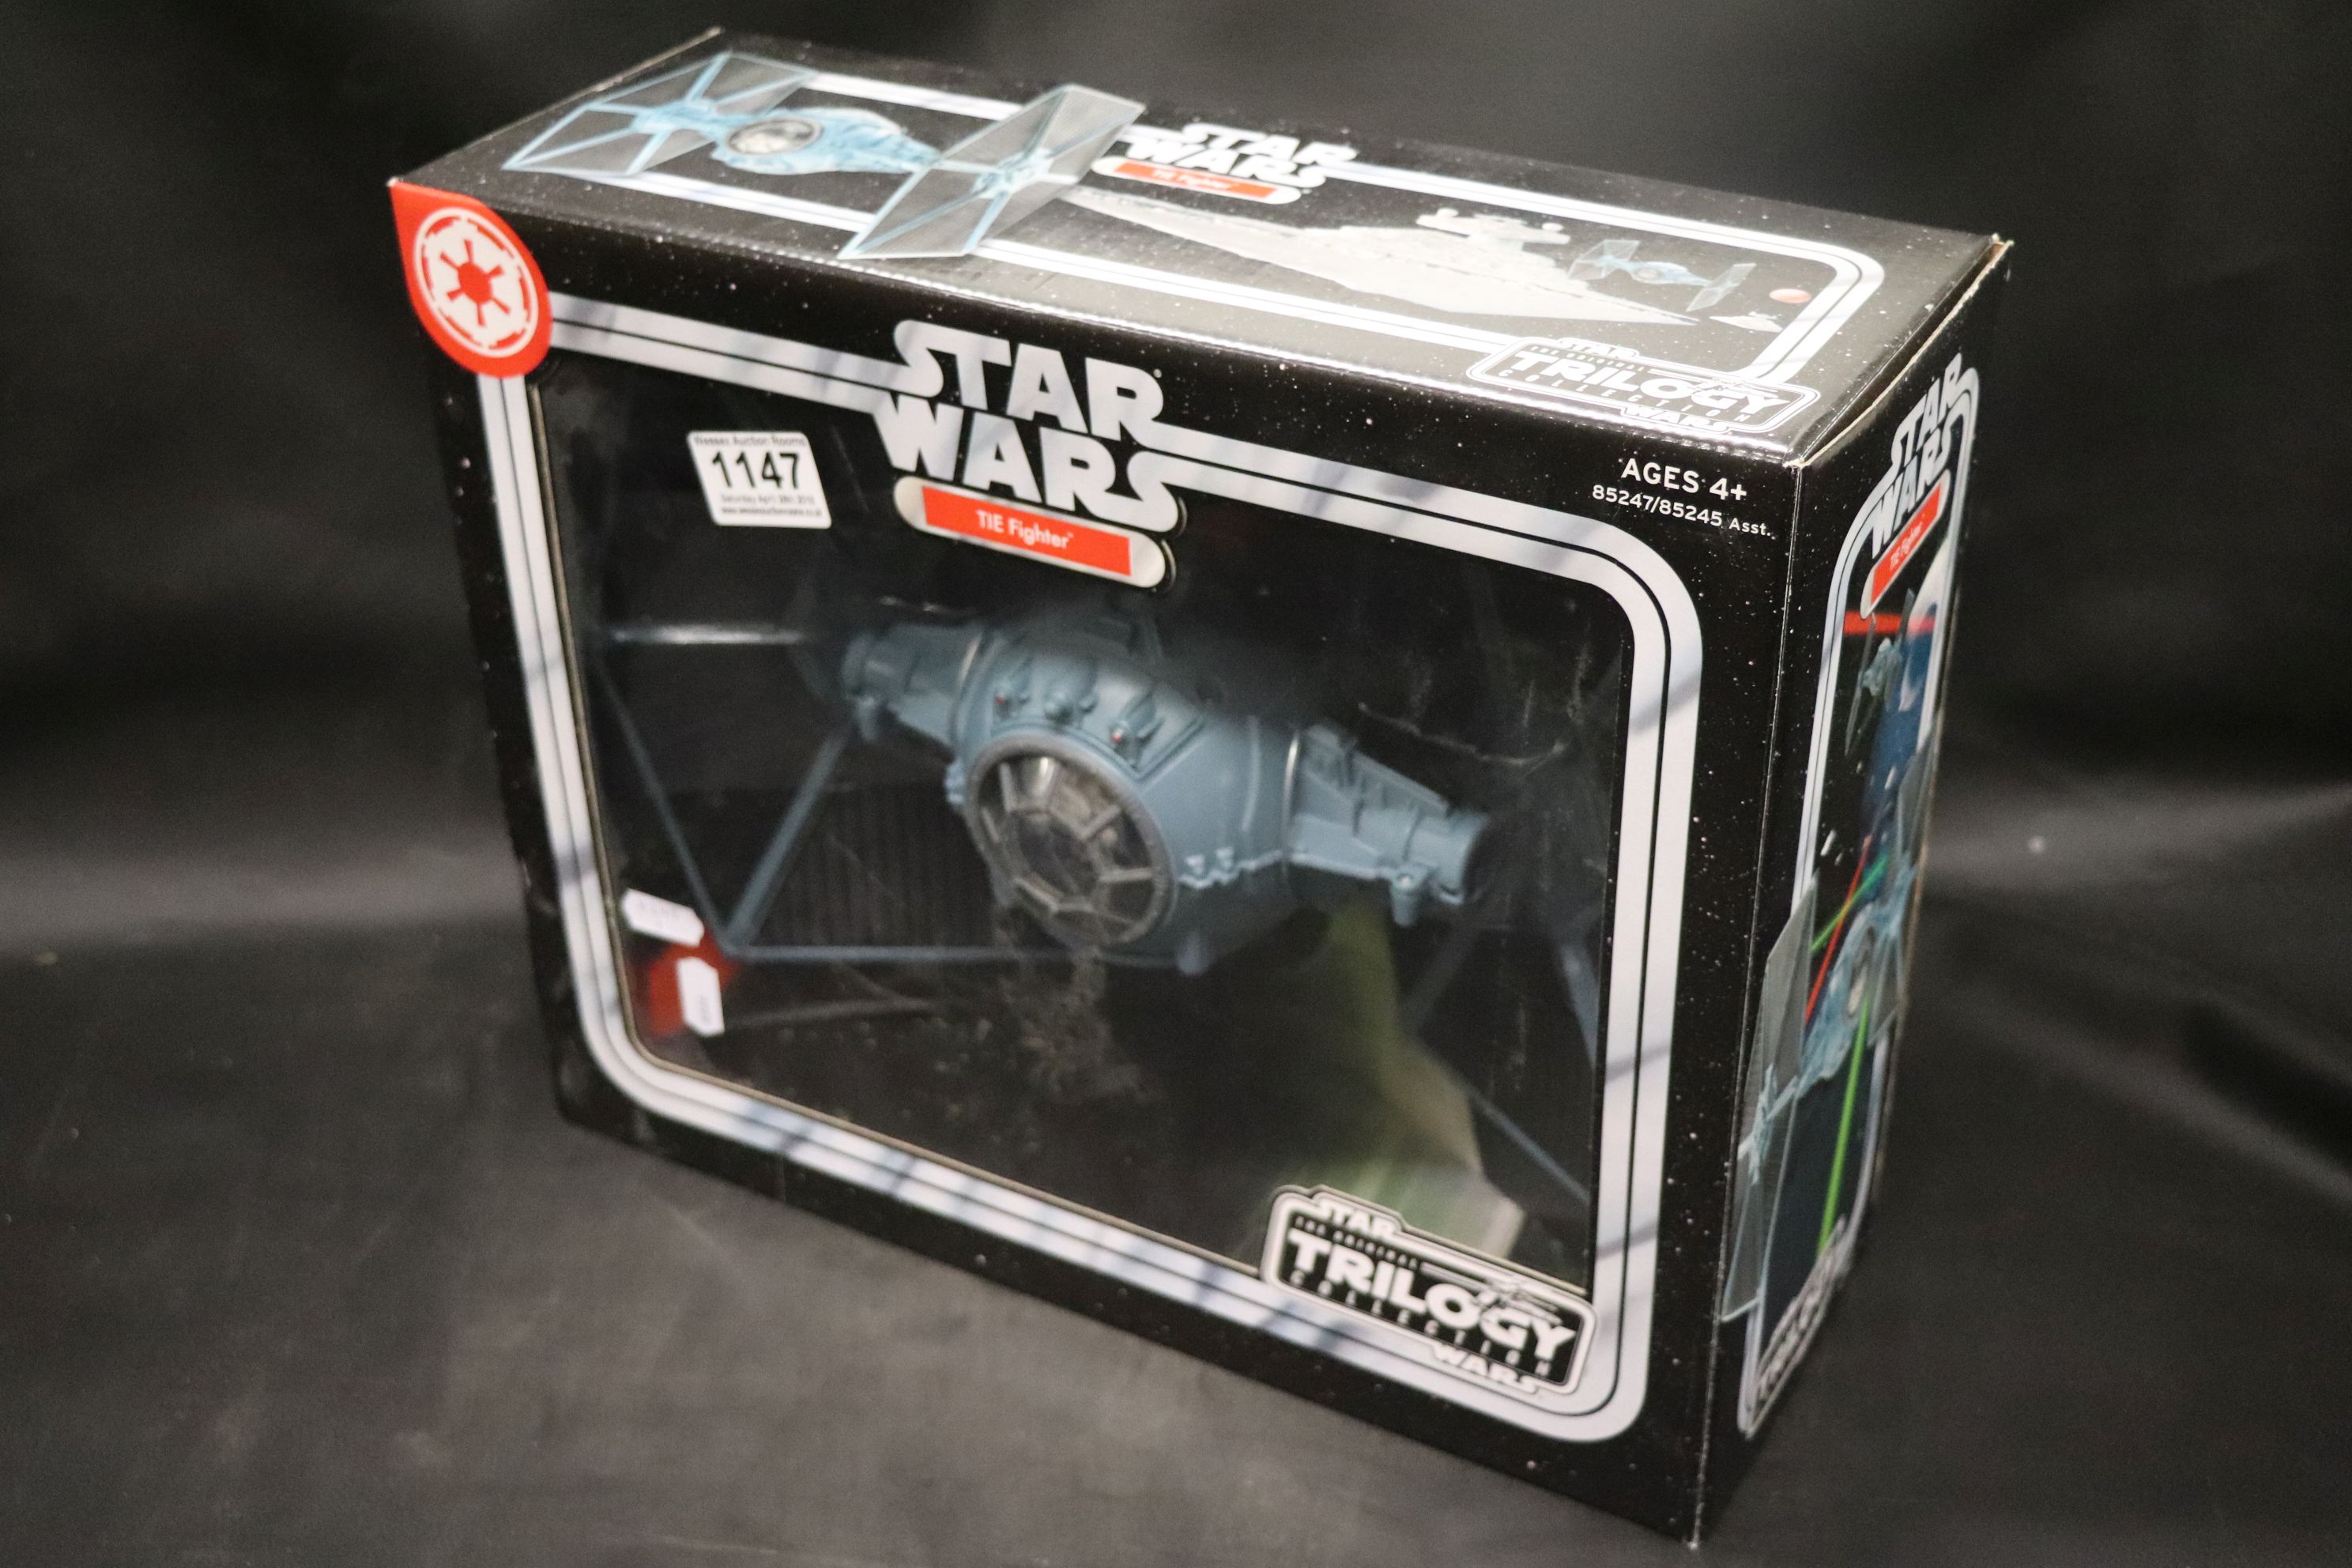 Boxed Hasbro Star Wars Original Trilogy Collection Tie Fighter in excellent condition - Image 2 of 4